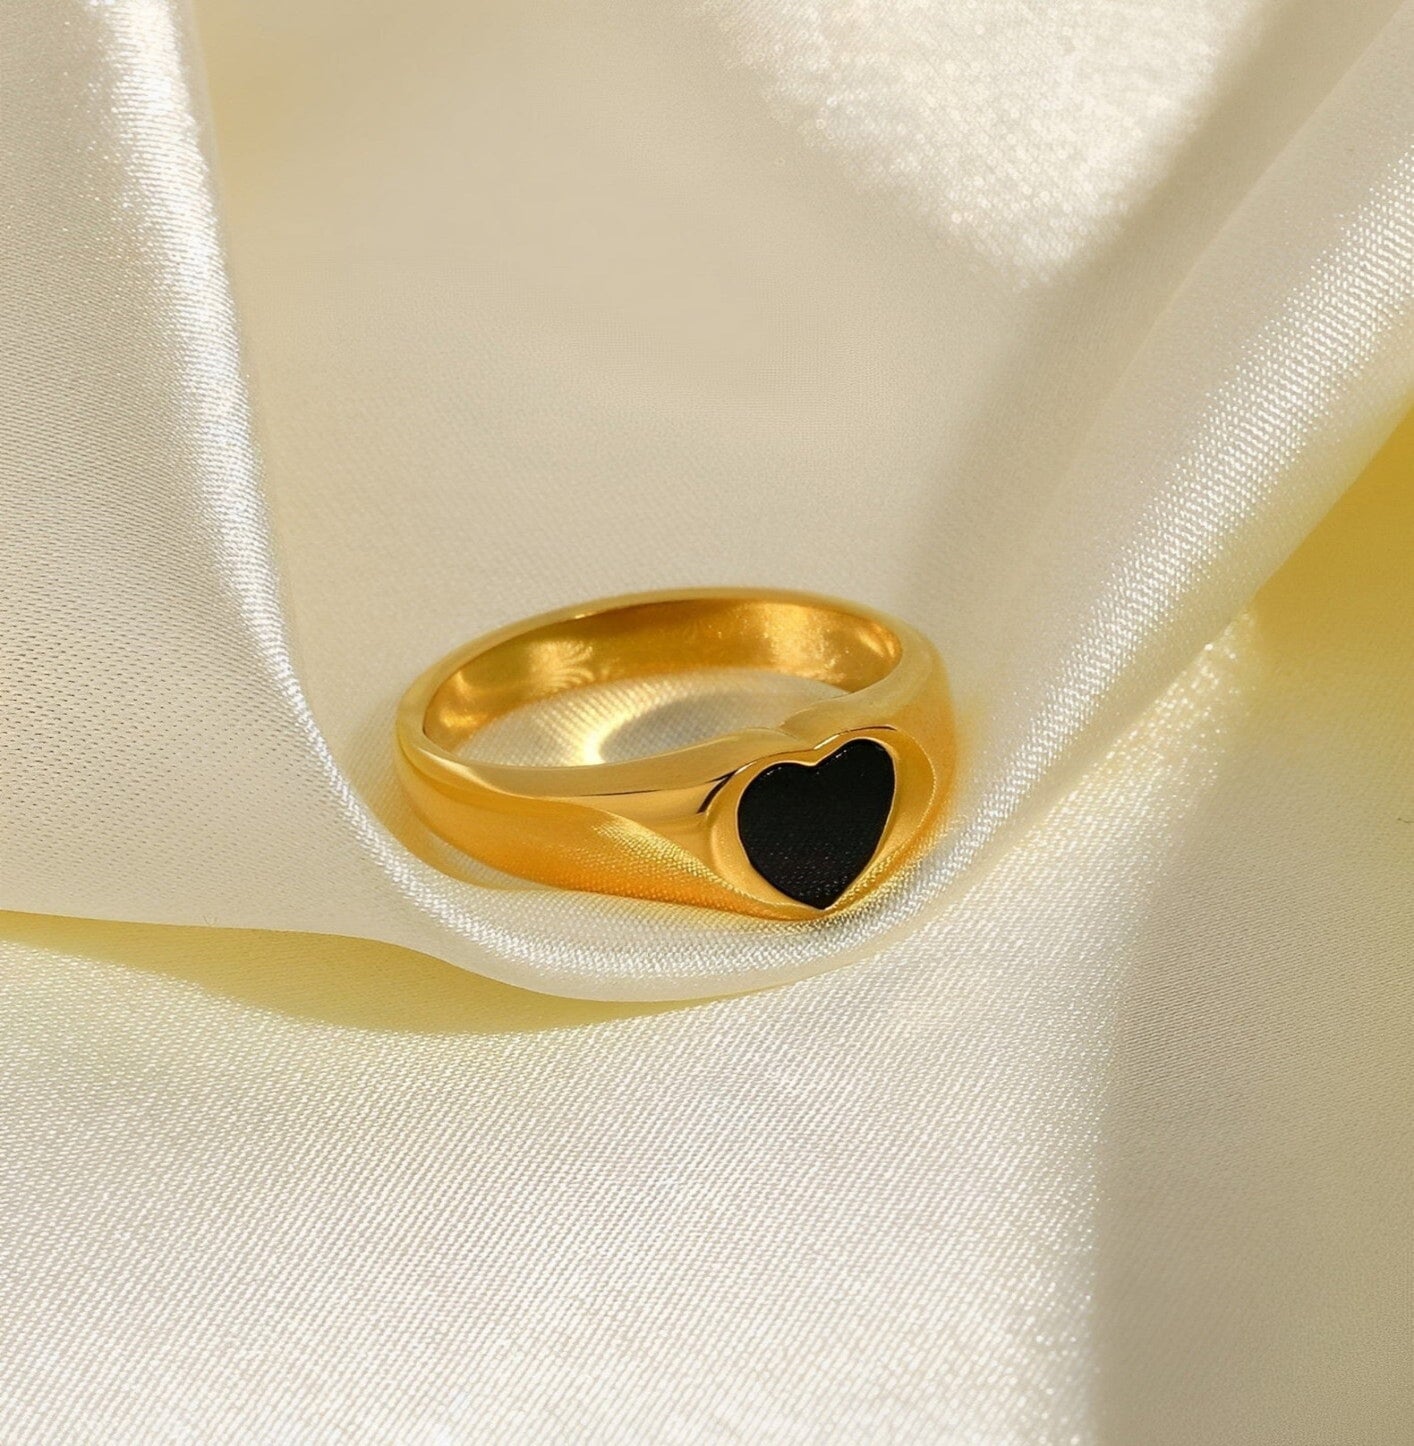 BLACK HEART RING ring Yubama Jewelry Online Store - The Elegant Designs of Gold and Silver ! 